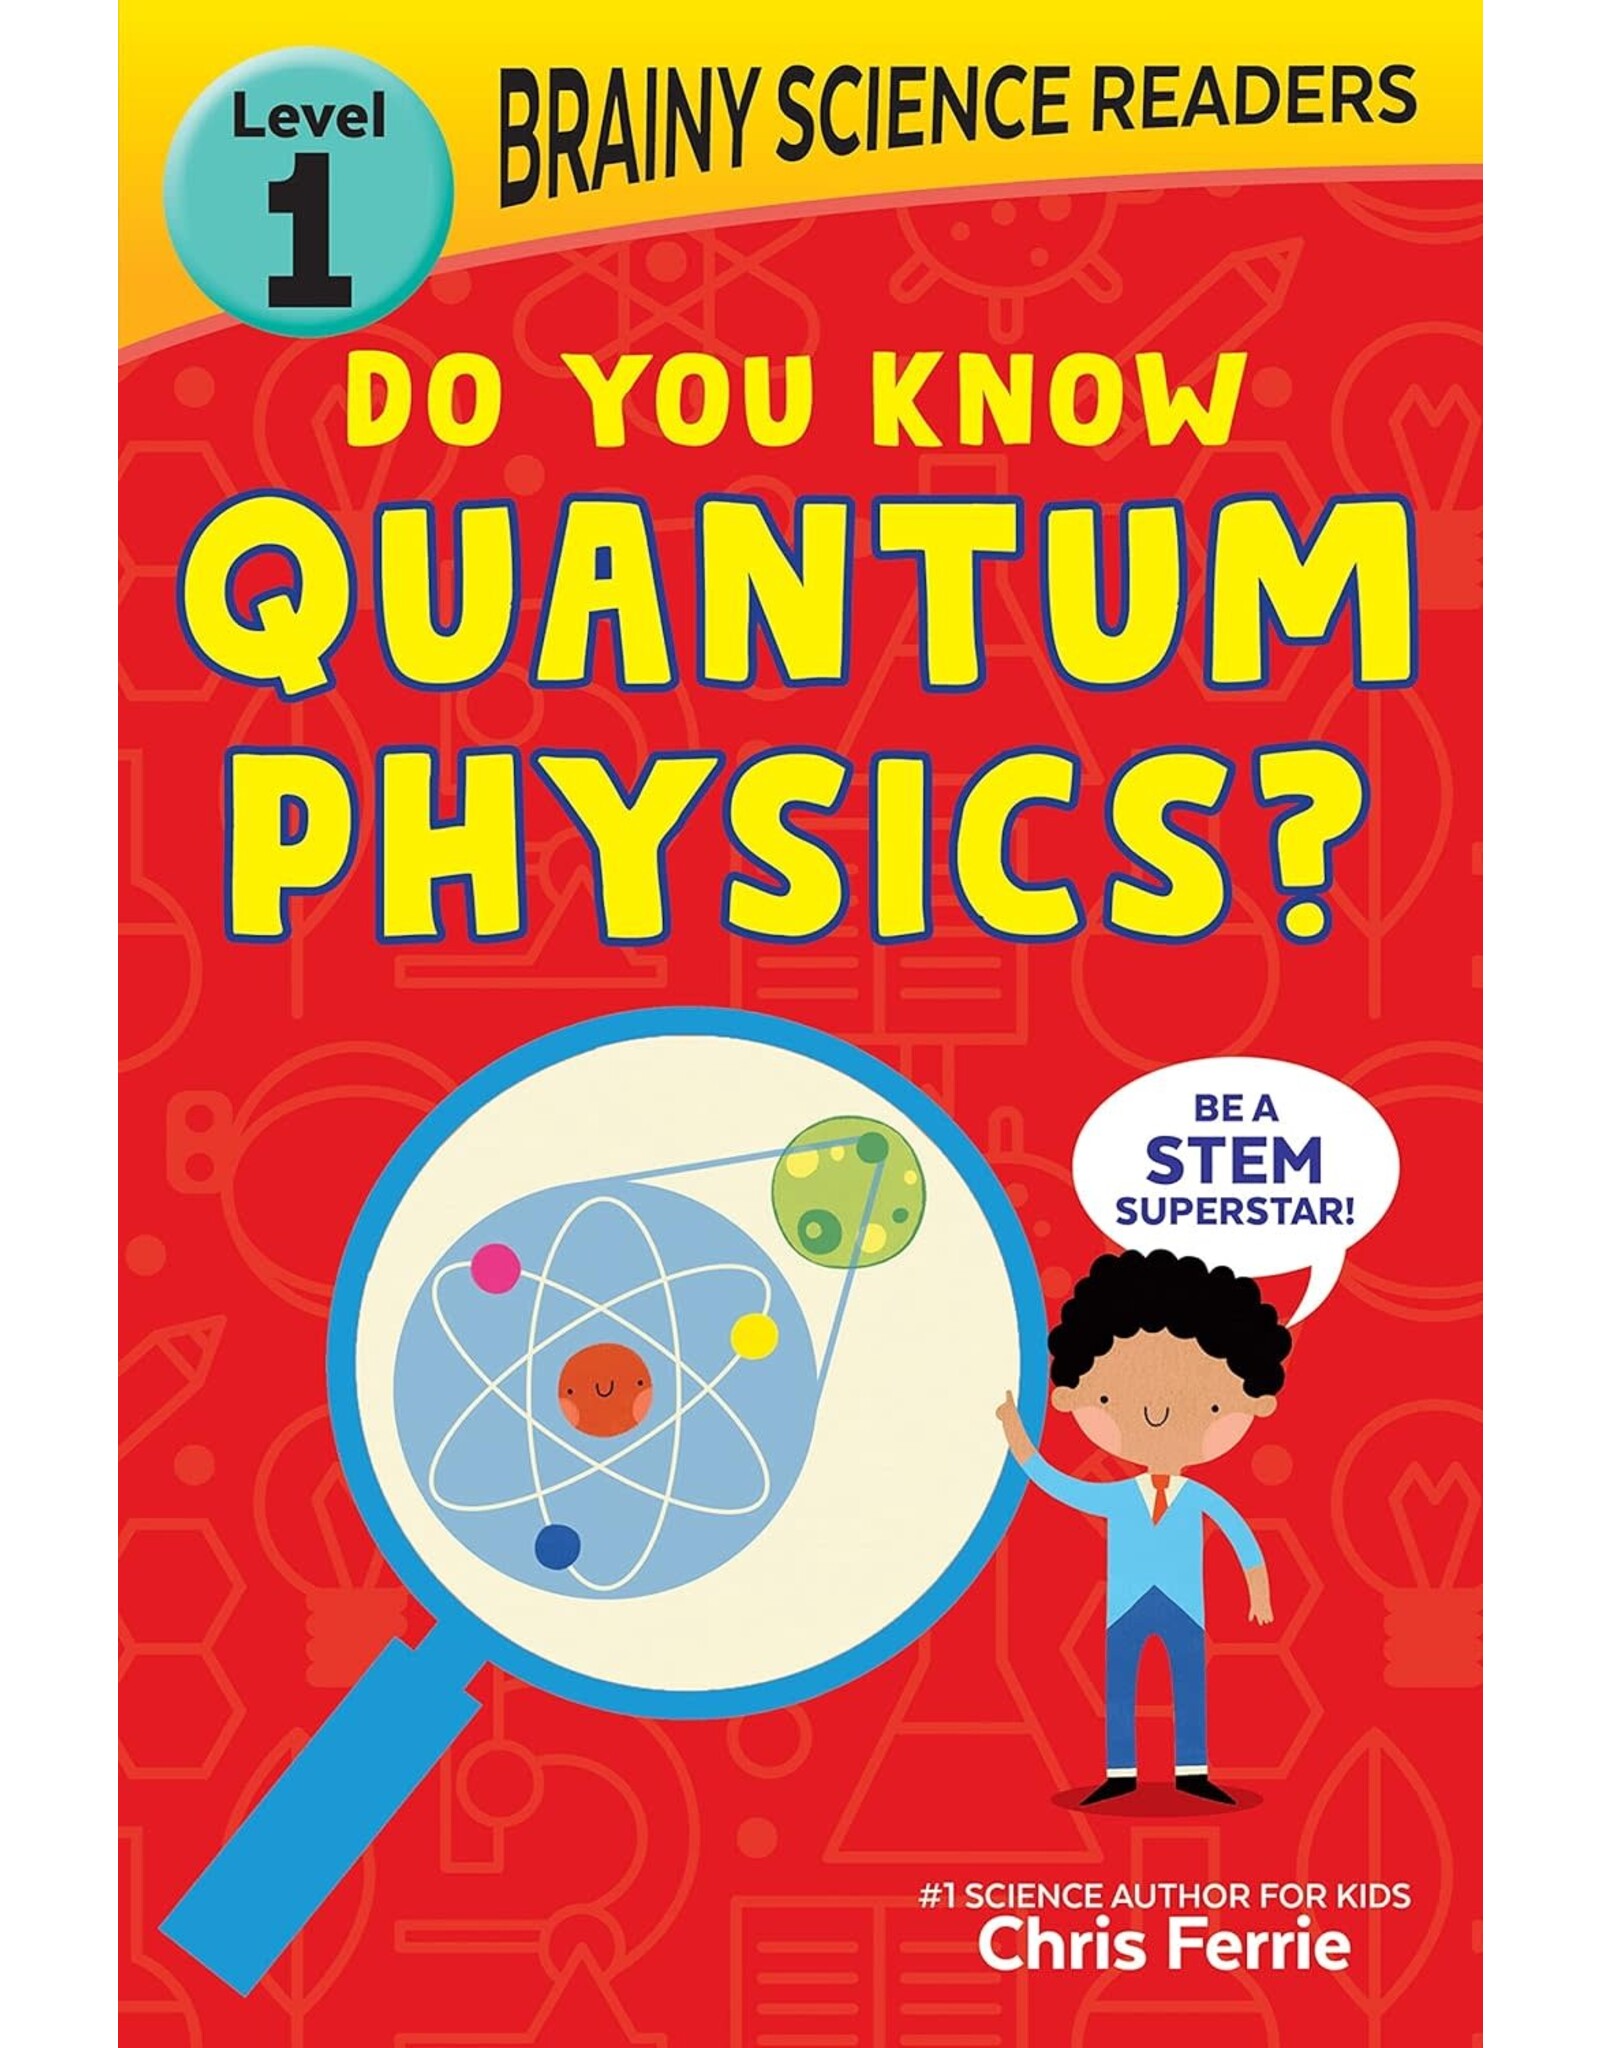 Brainy Science Readers: Do You Know Quantum Physics?